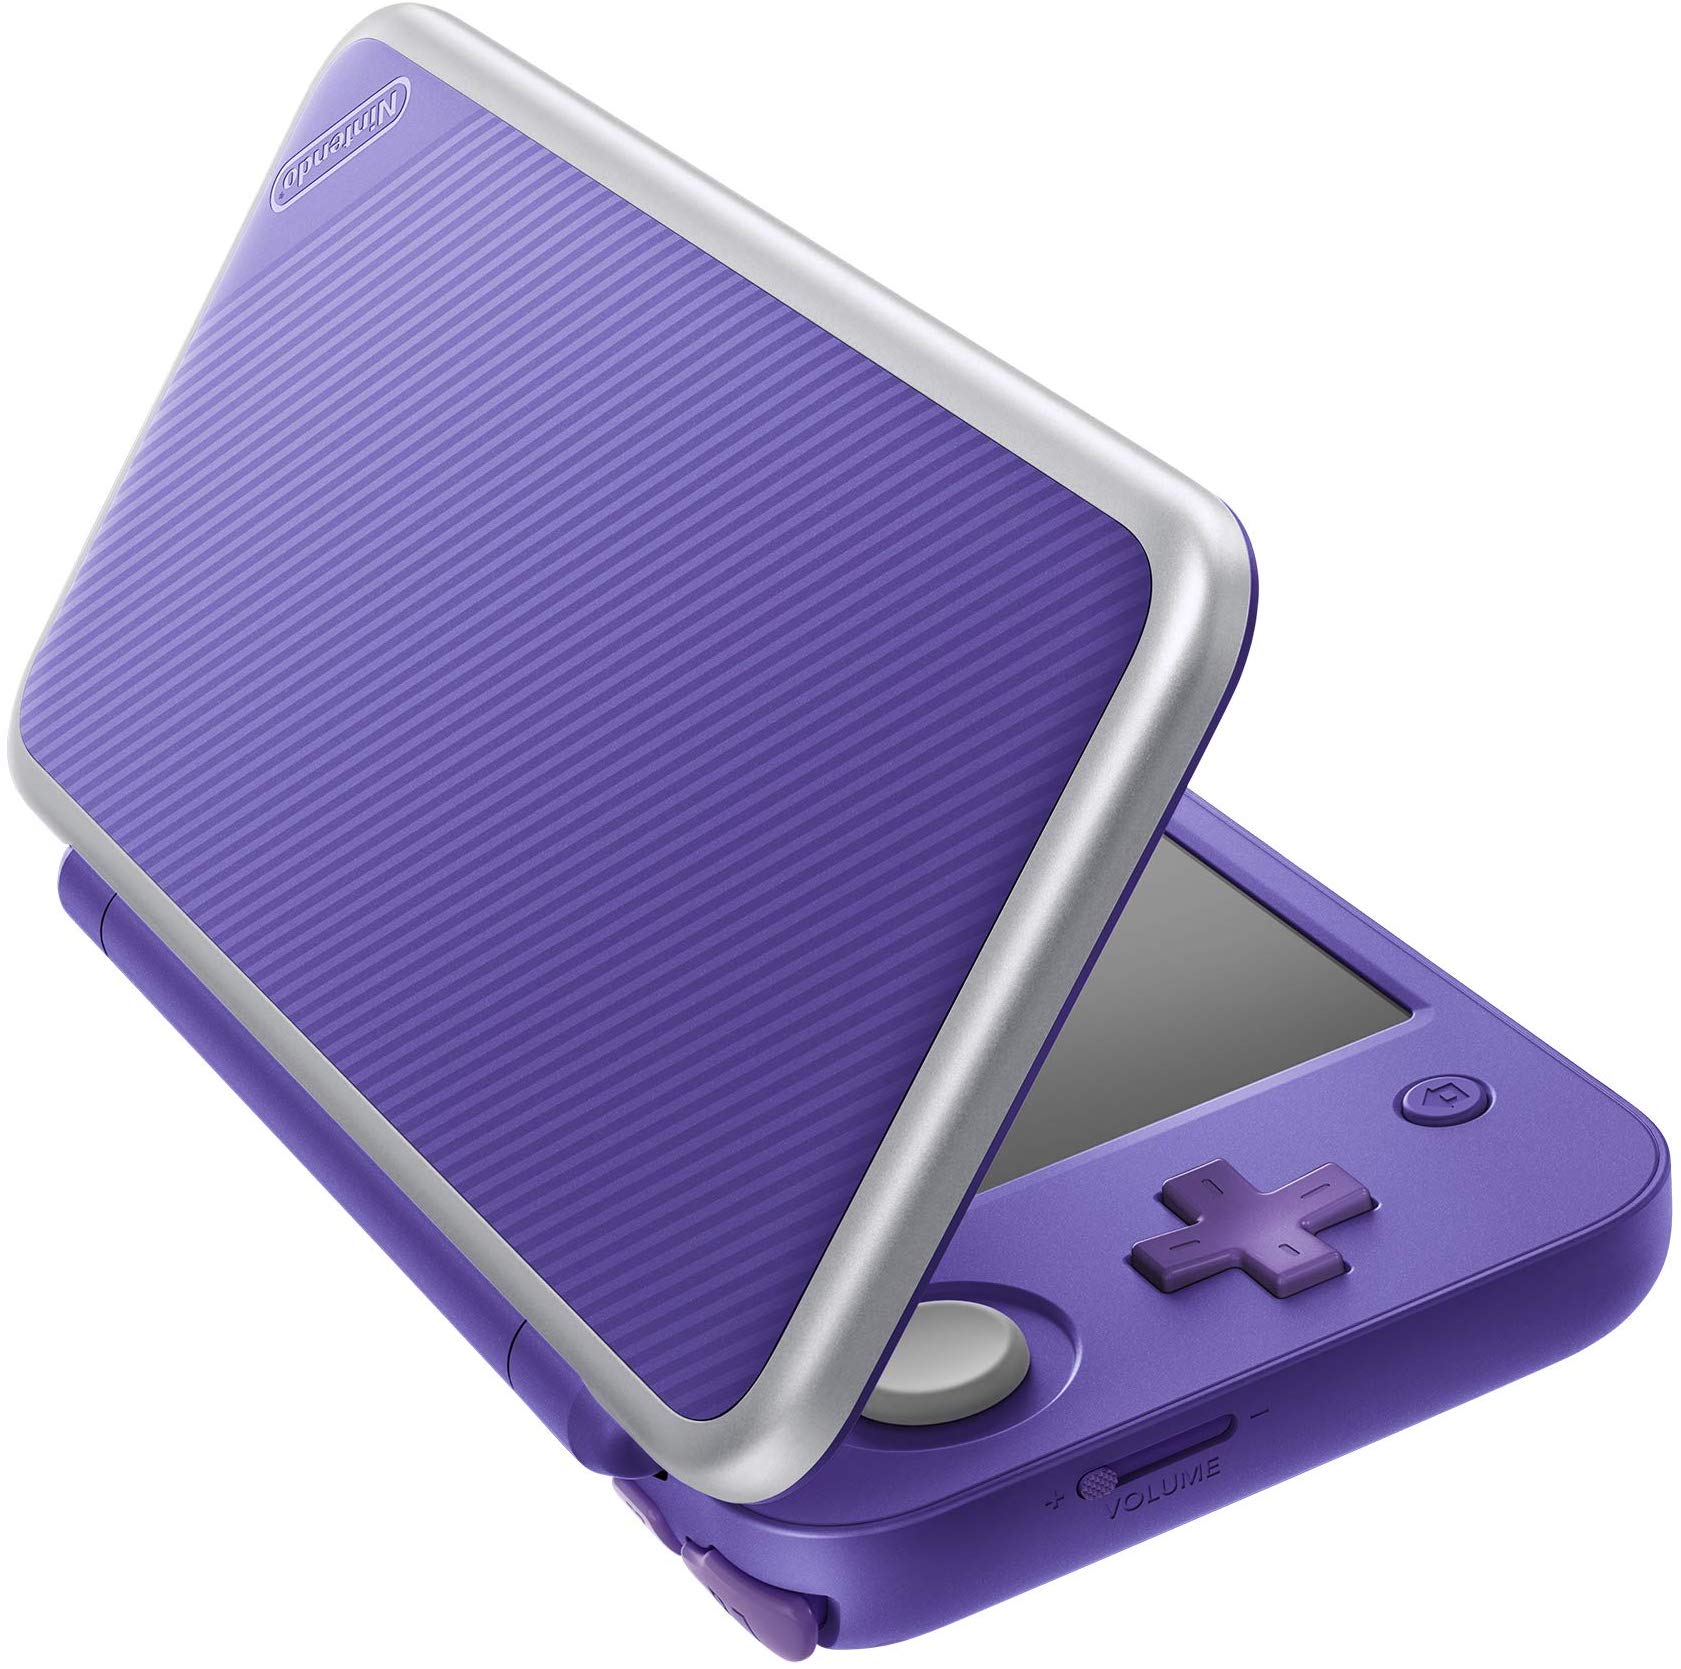 Photos Of The Purple Silver New 2ds Xl Nintendo Everything